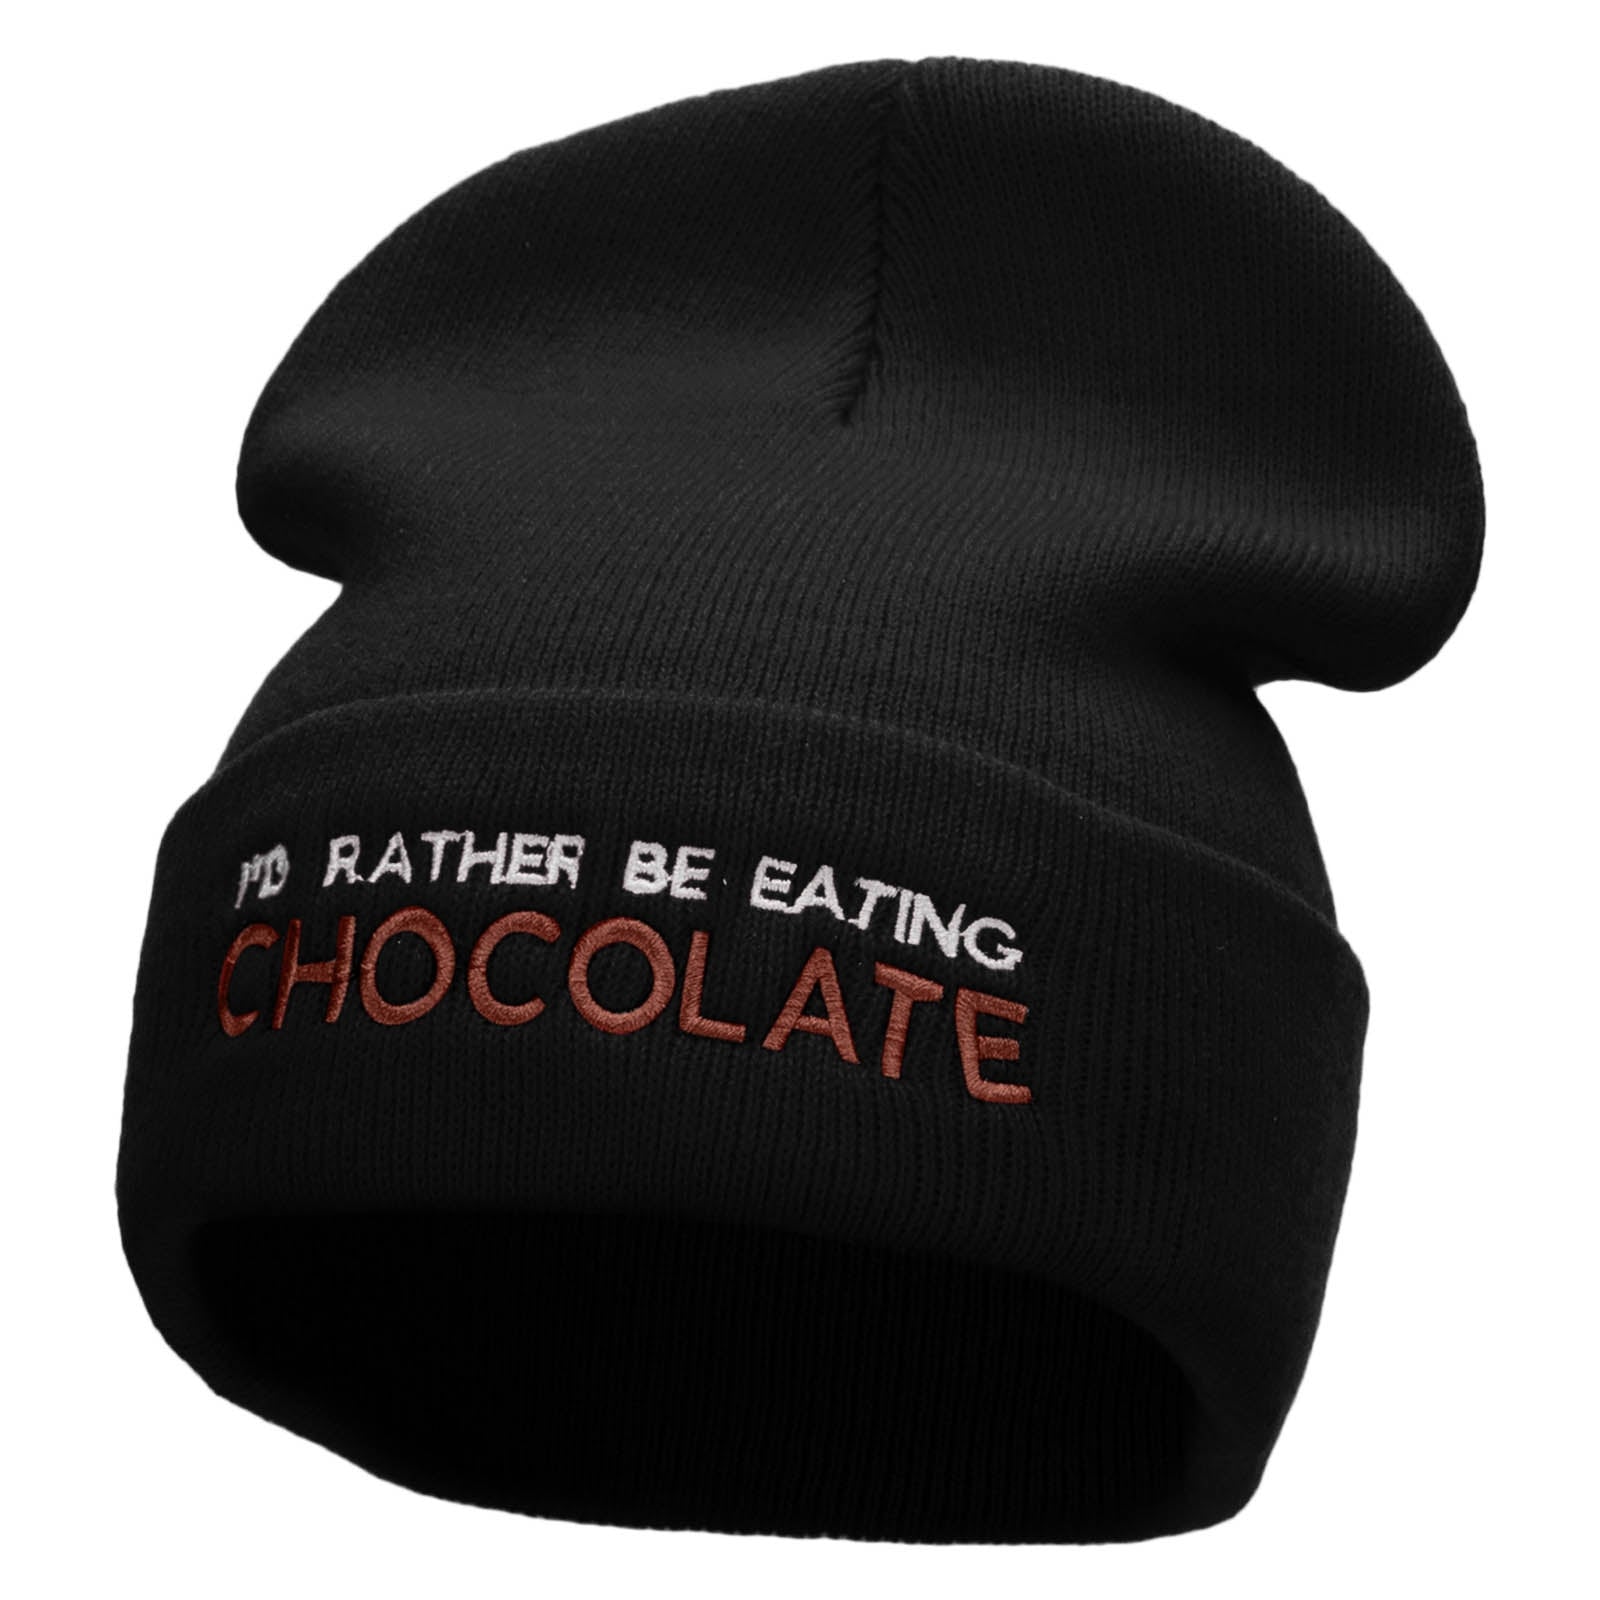 I Rather Be Eating Chocolate Embroidered 12 Inch Long Knitted Beanie - Black OSFM